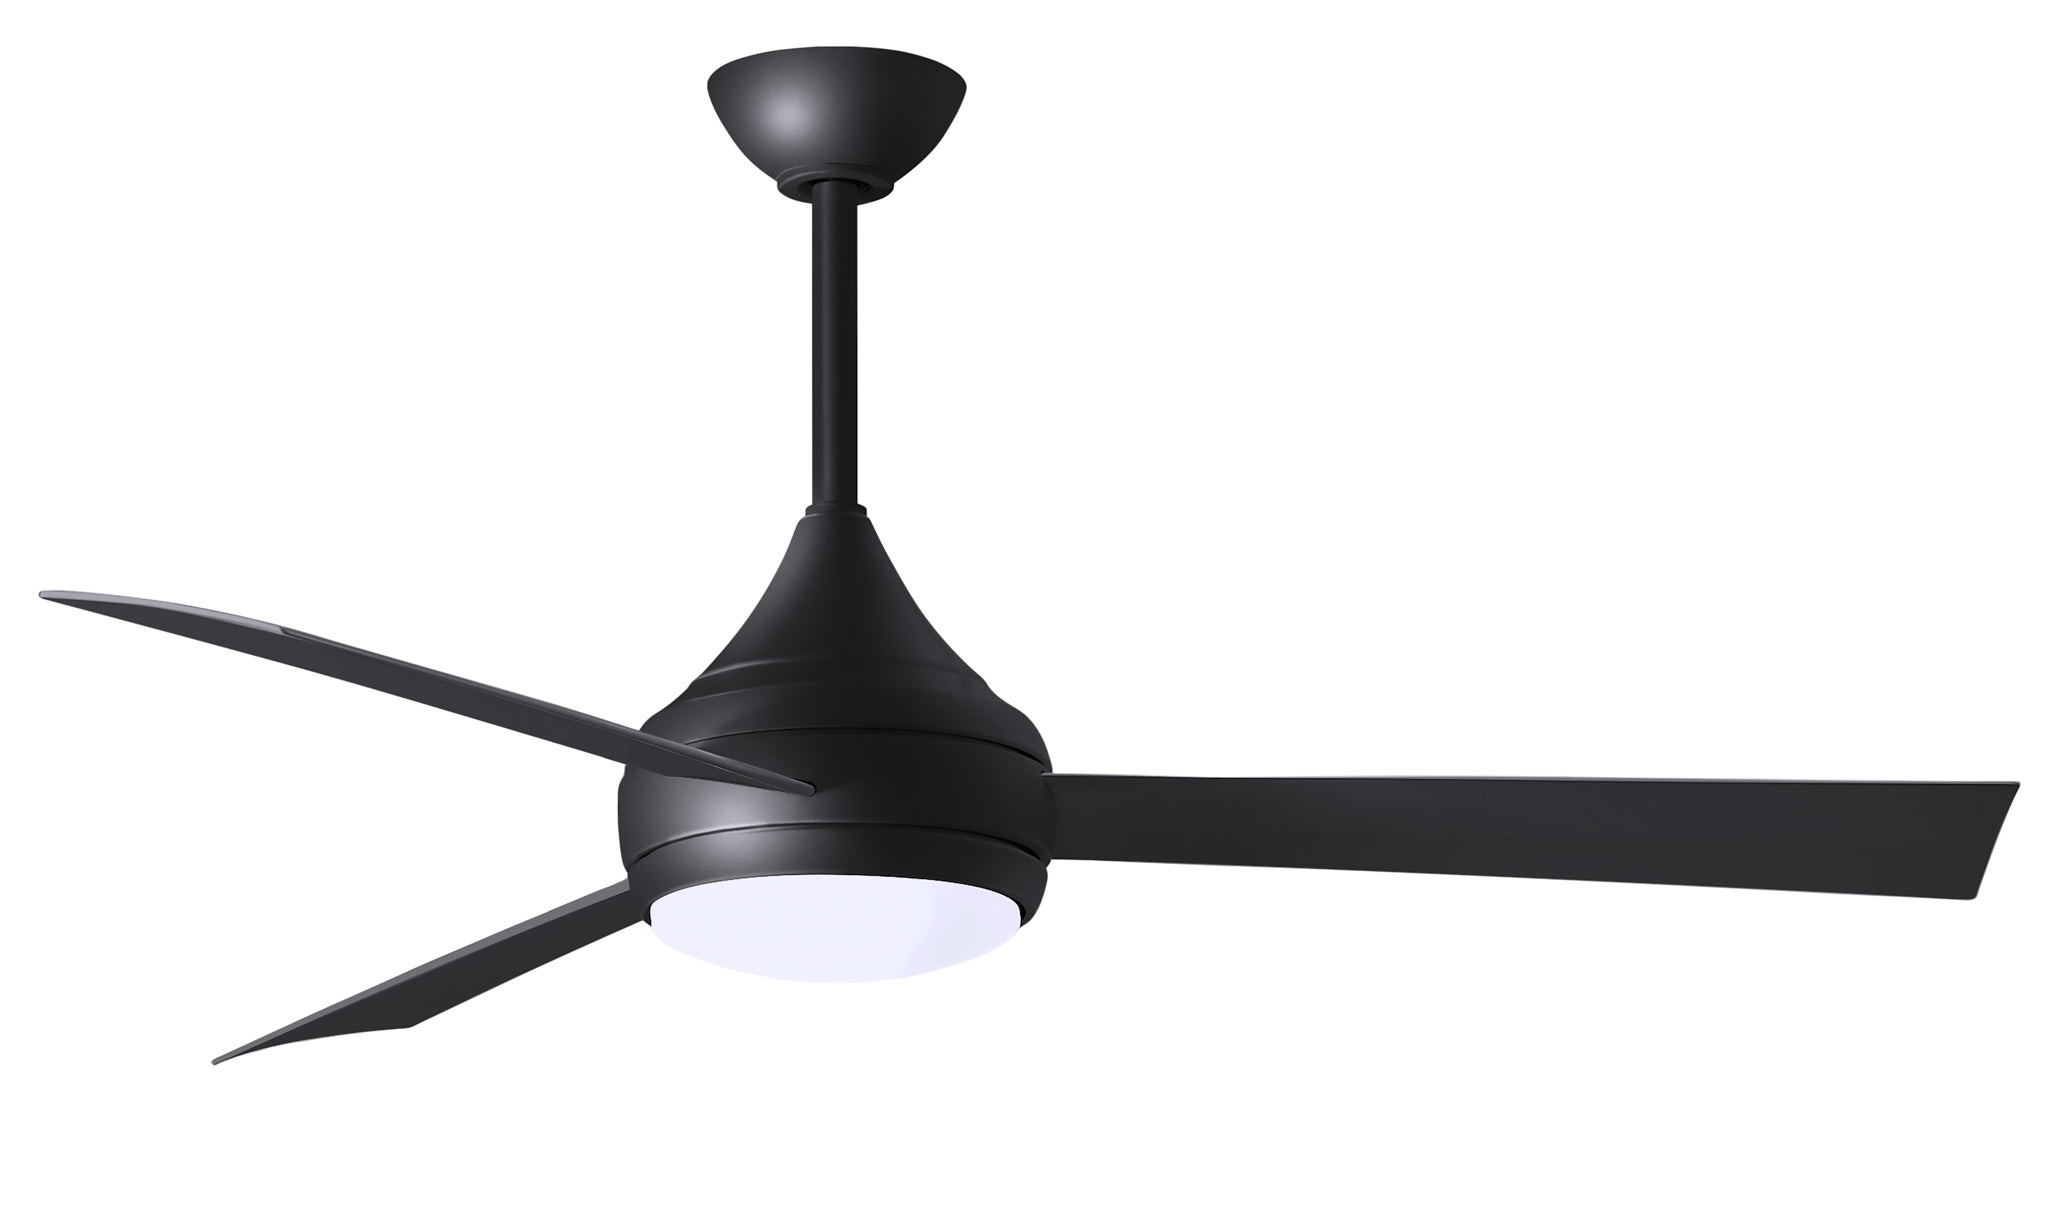 Donaire ceiling fan in Matte Black with Black blades without light cap manufactured by Matthews Fan Company.